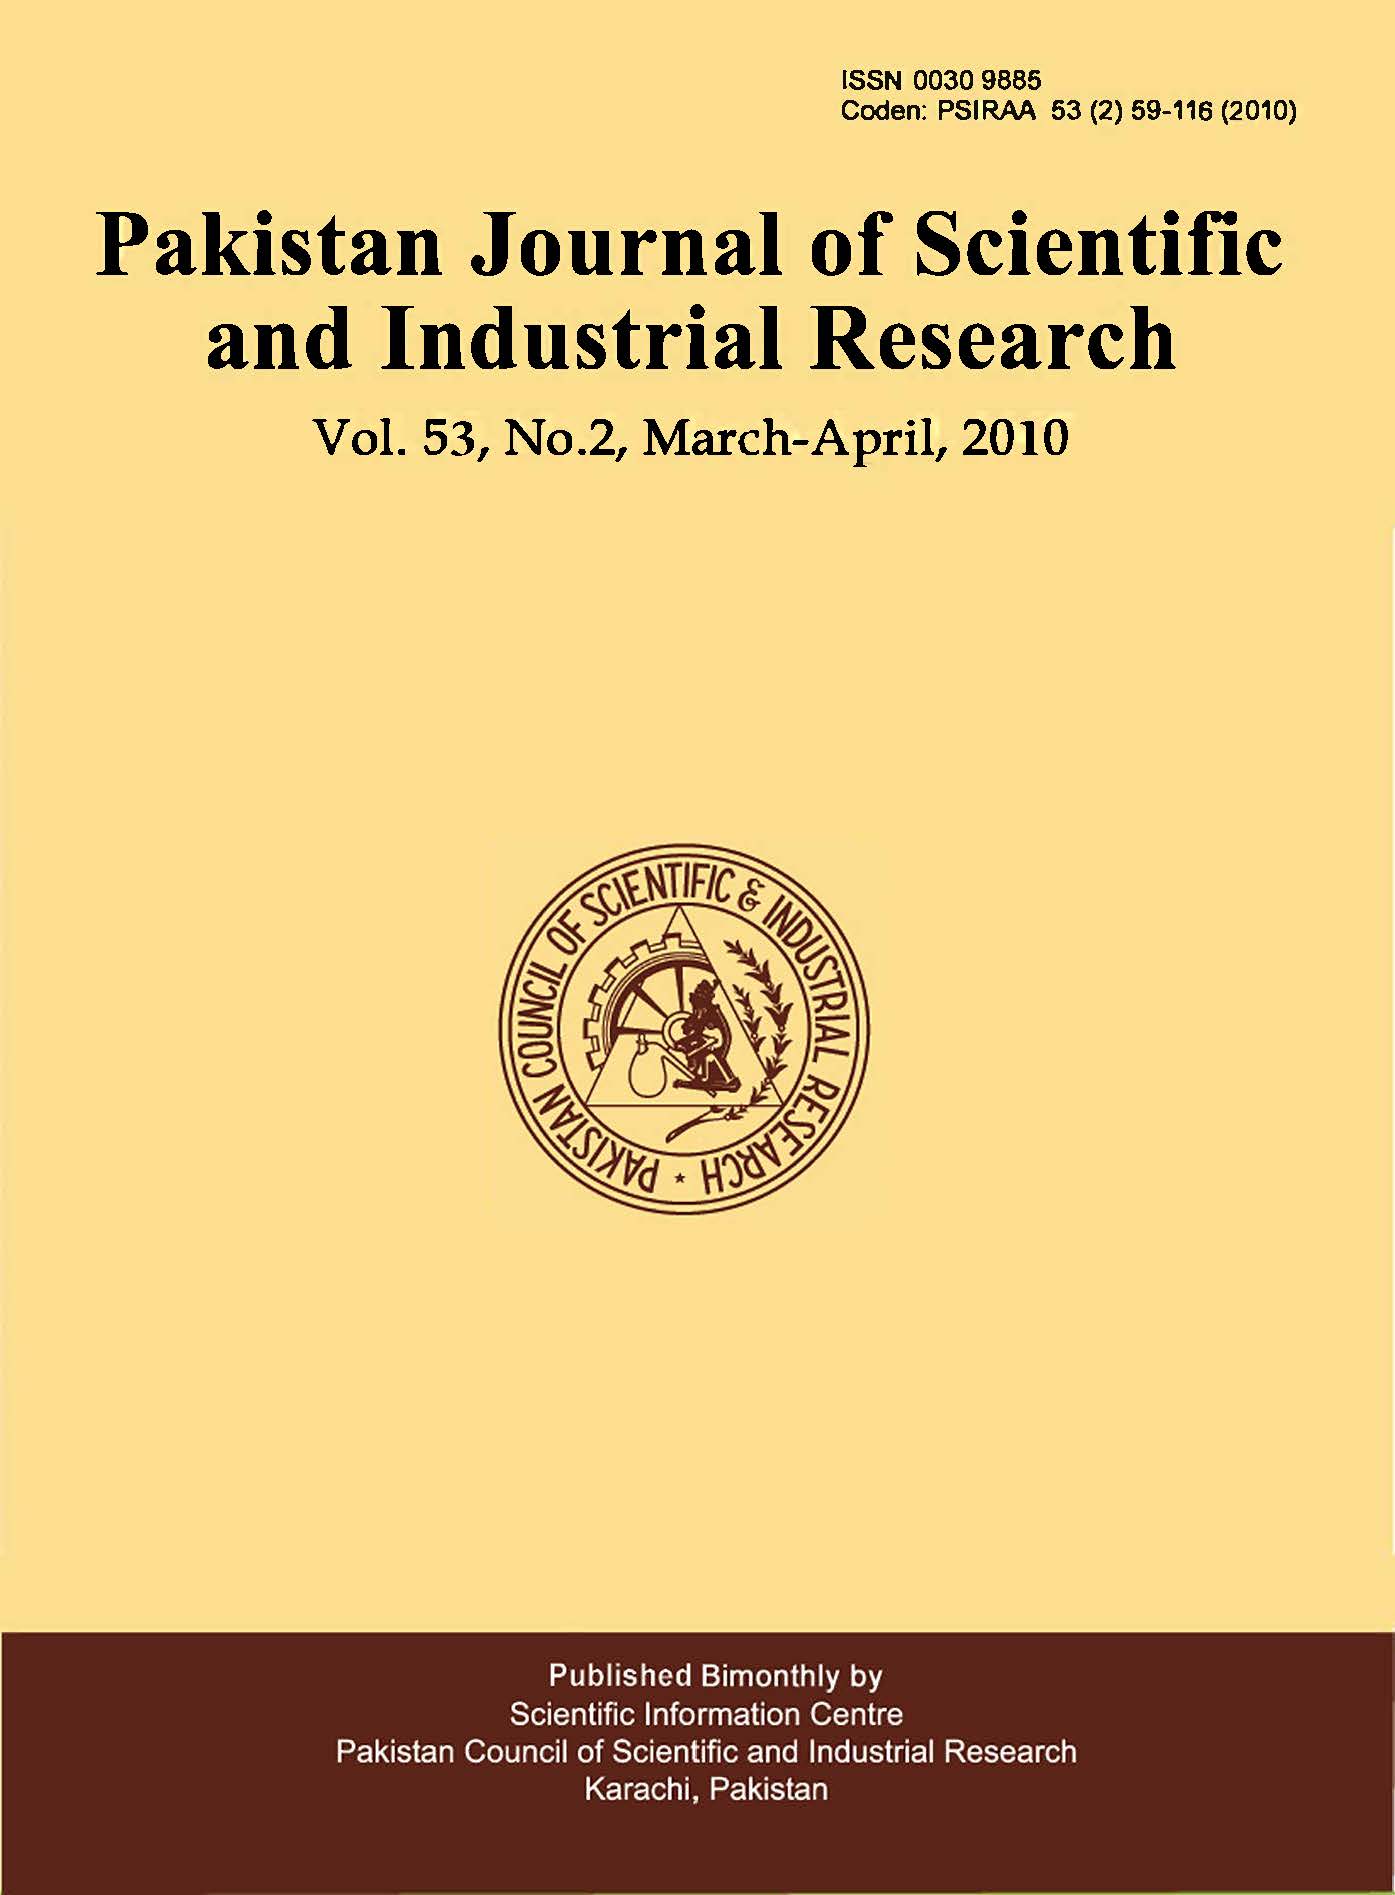 					View Vol. 53 No. 2 (2010): Pakistan Journal of Scientific and Industrial Research
				